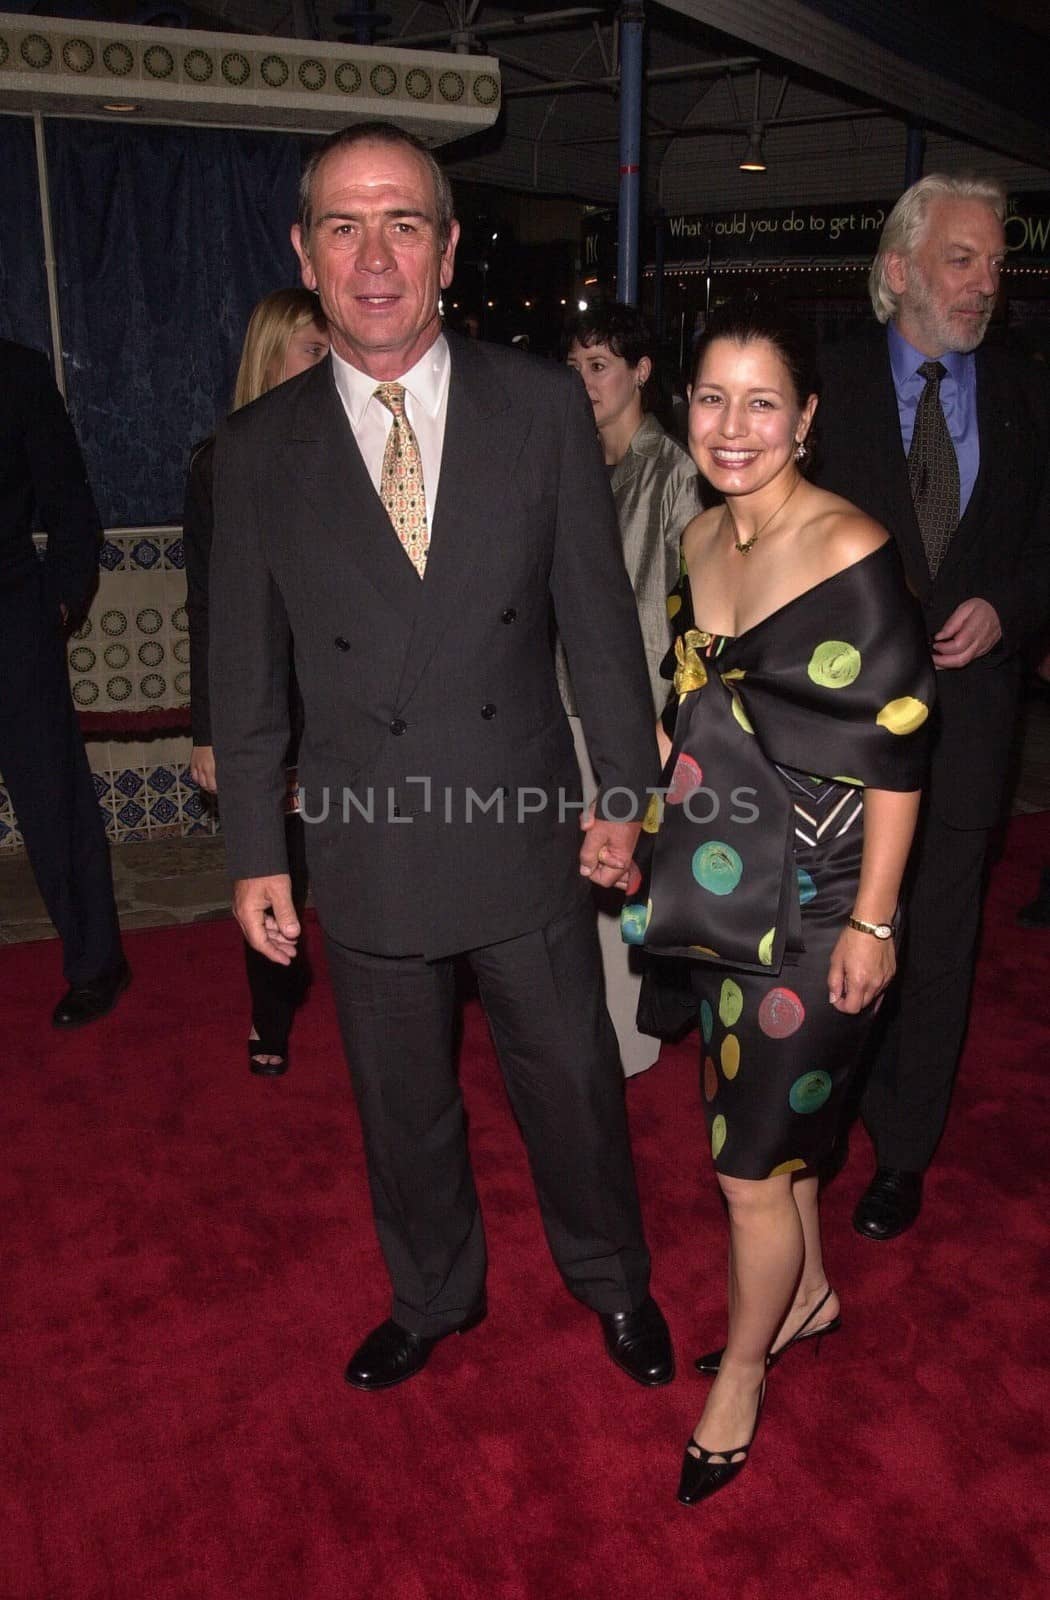 Tommy Lee Jones and Date at the premiere of "Space Cowboys" in Westwood. 08-01-00